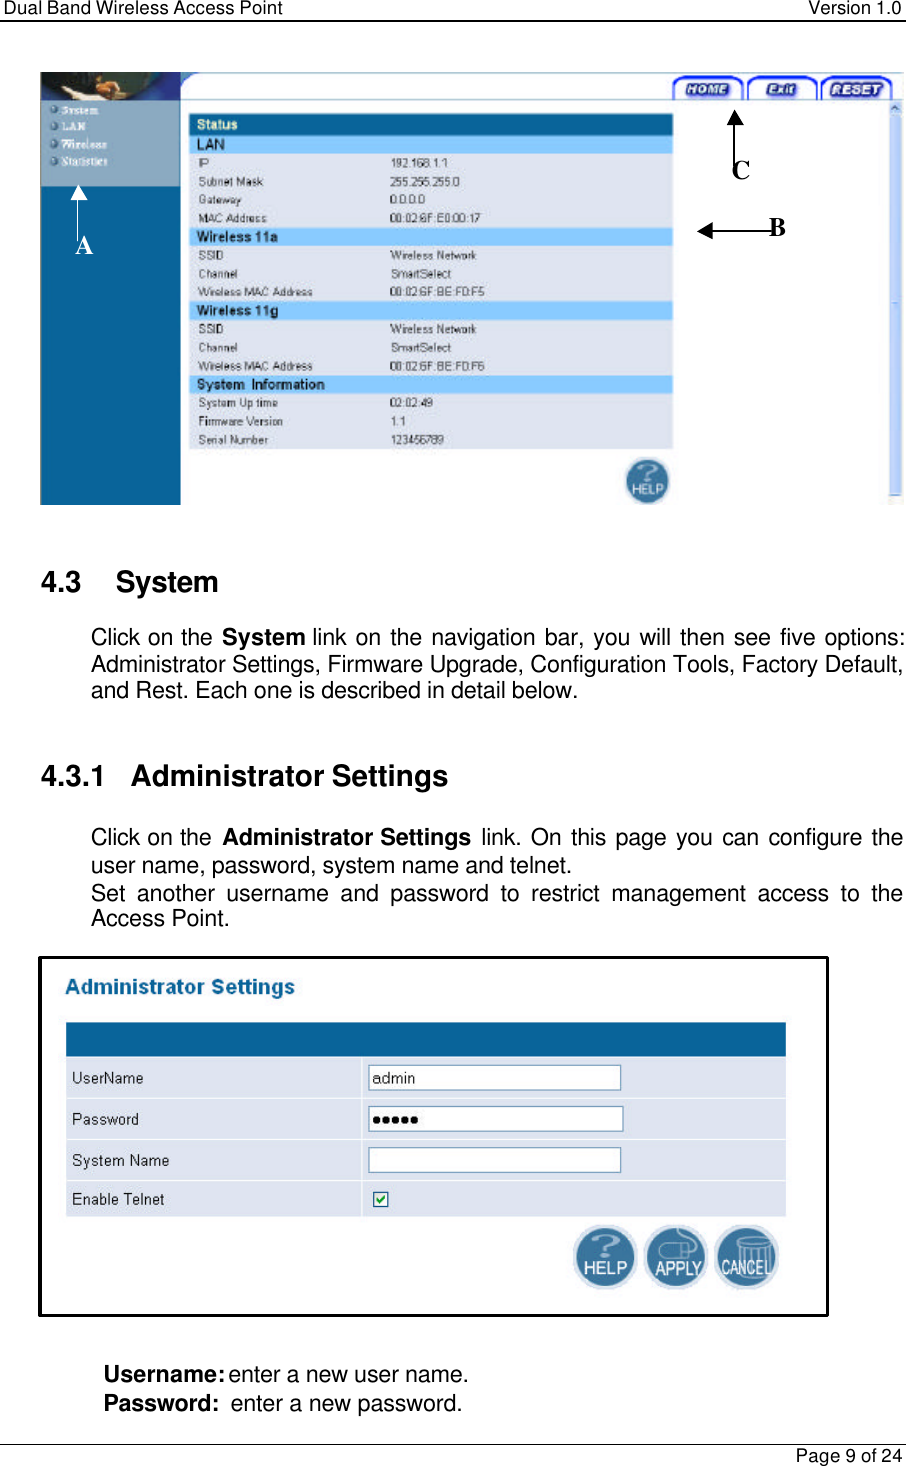 Dual Band Wireless Access Point Version 1.0Page 9 of 244.3 System Click on the System link on the navigation bar, you will then see five options:Administrator Settings, Firmware Upgrade, Configuration Tools, Factory Default,and Rest. Each one is described in detail below.4.3.1   Administrator Settings Click on the Administrator Settings link. On this page you can configure theuser name, password, system name and telnet. Set another username and password to restrict management access to theAccess Point. Username: enter a new user name. Password:  enter a new password.ACB